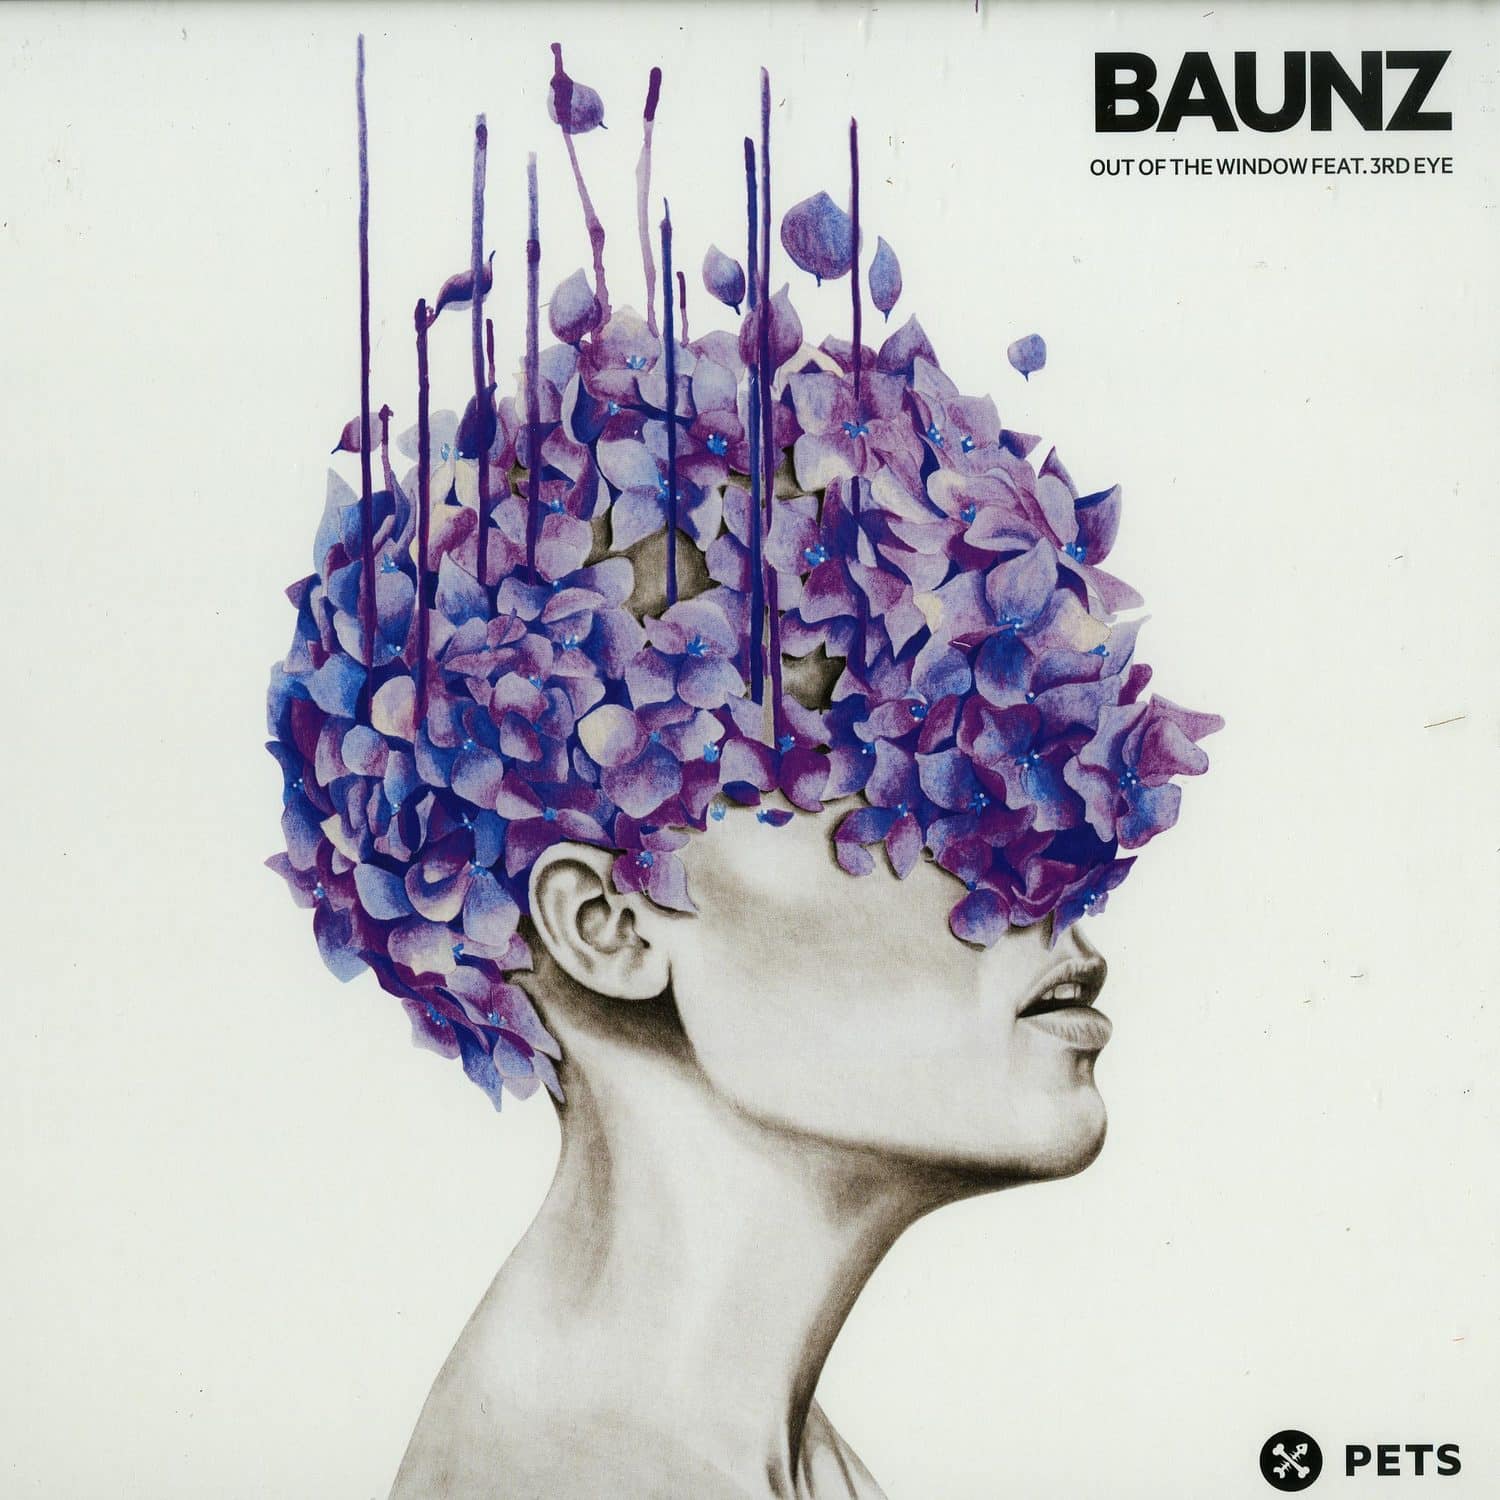 Baunz - OUT OF THE WINDOW FEAT 3RD EYE 